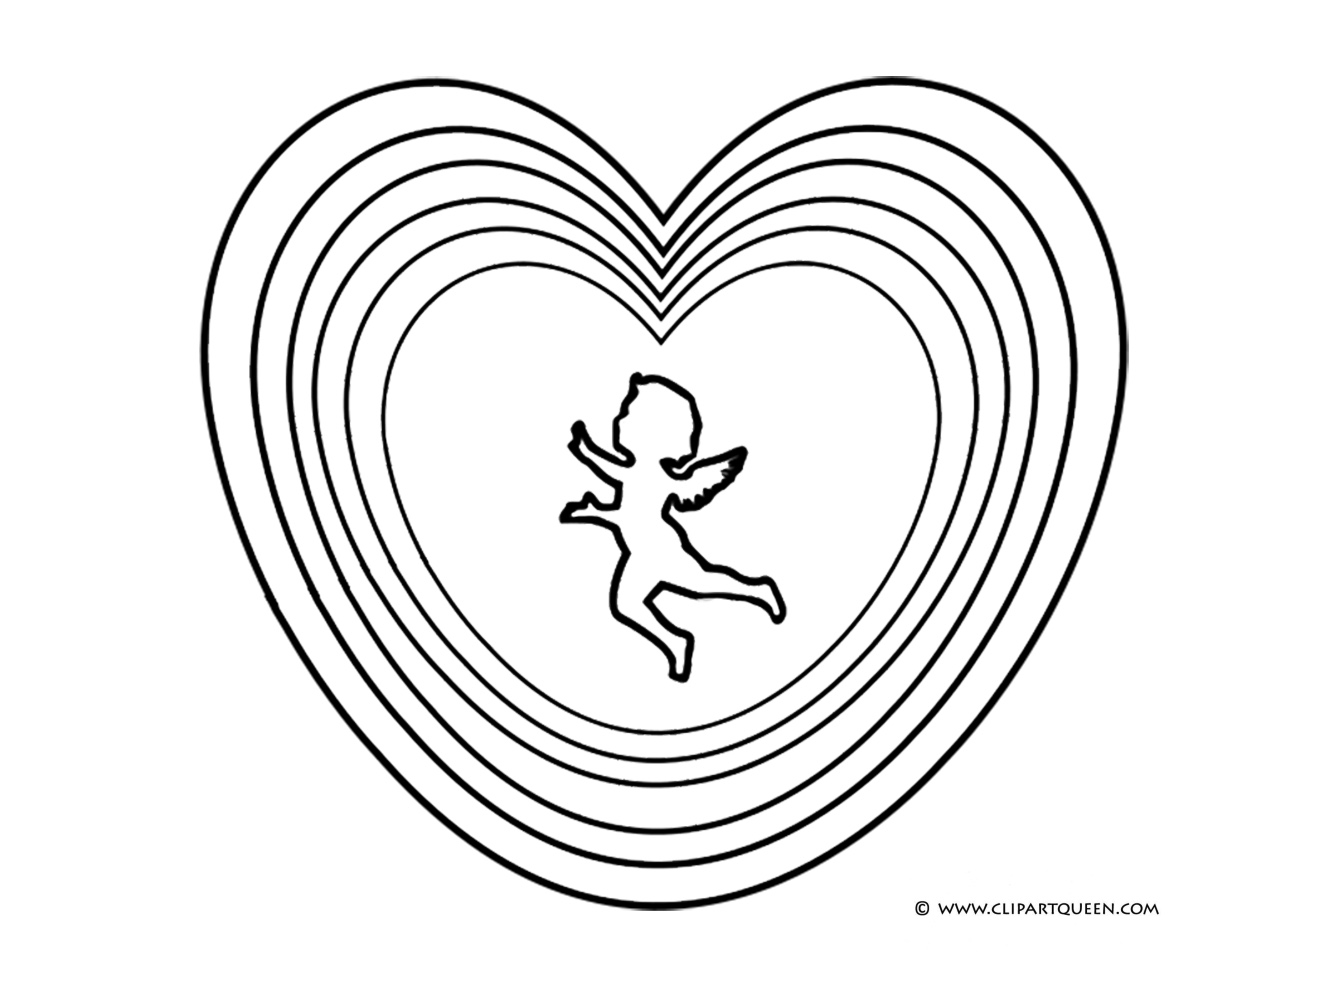 Cupid silhouette in shapes of hearts